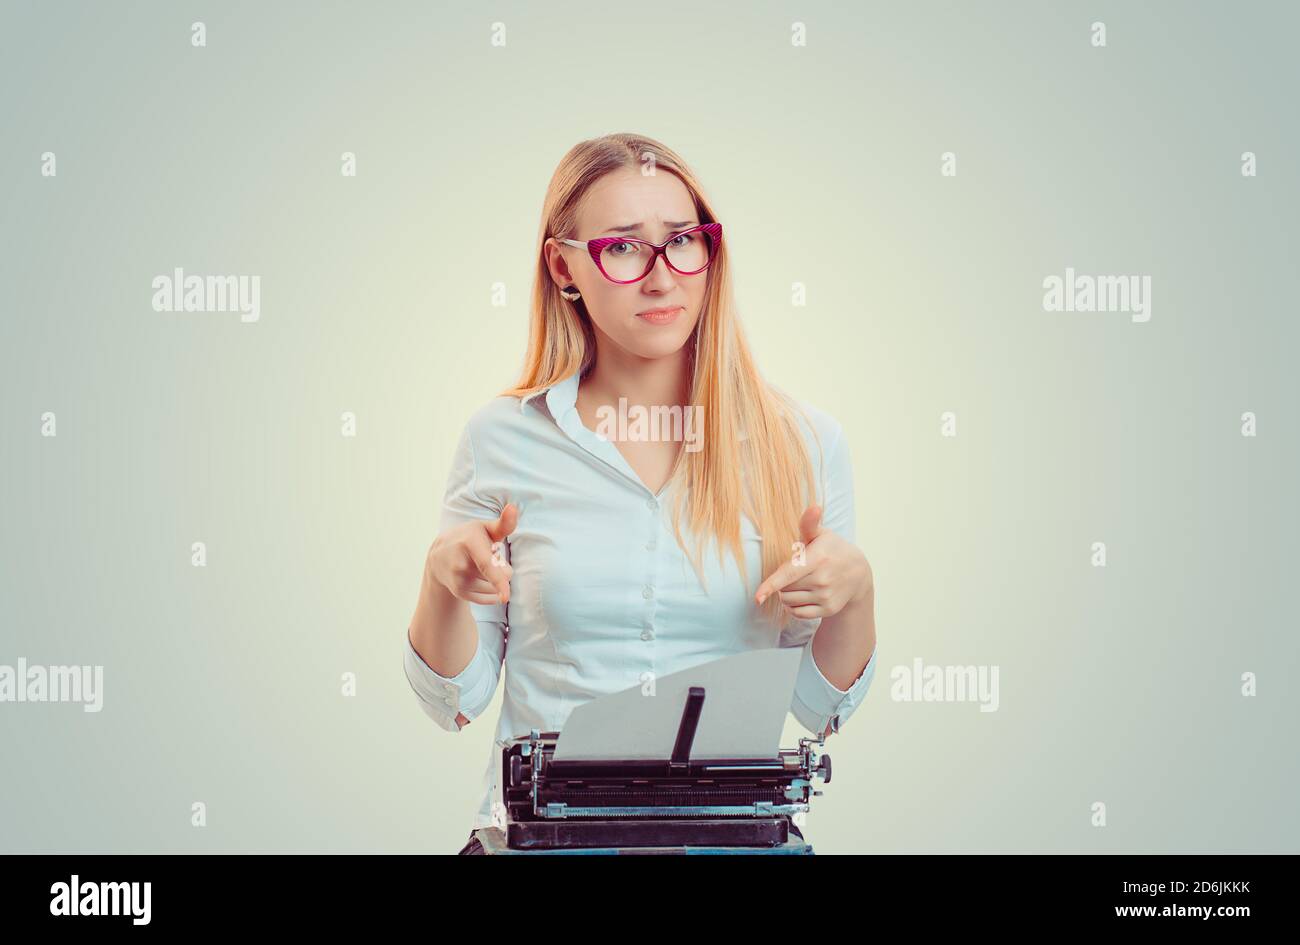 Look right here I am writing a story. Writer journalist at work. Woman young girl typing on a typewriter old writing machine pointing on paper isolate Stock Photo